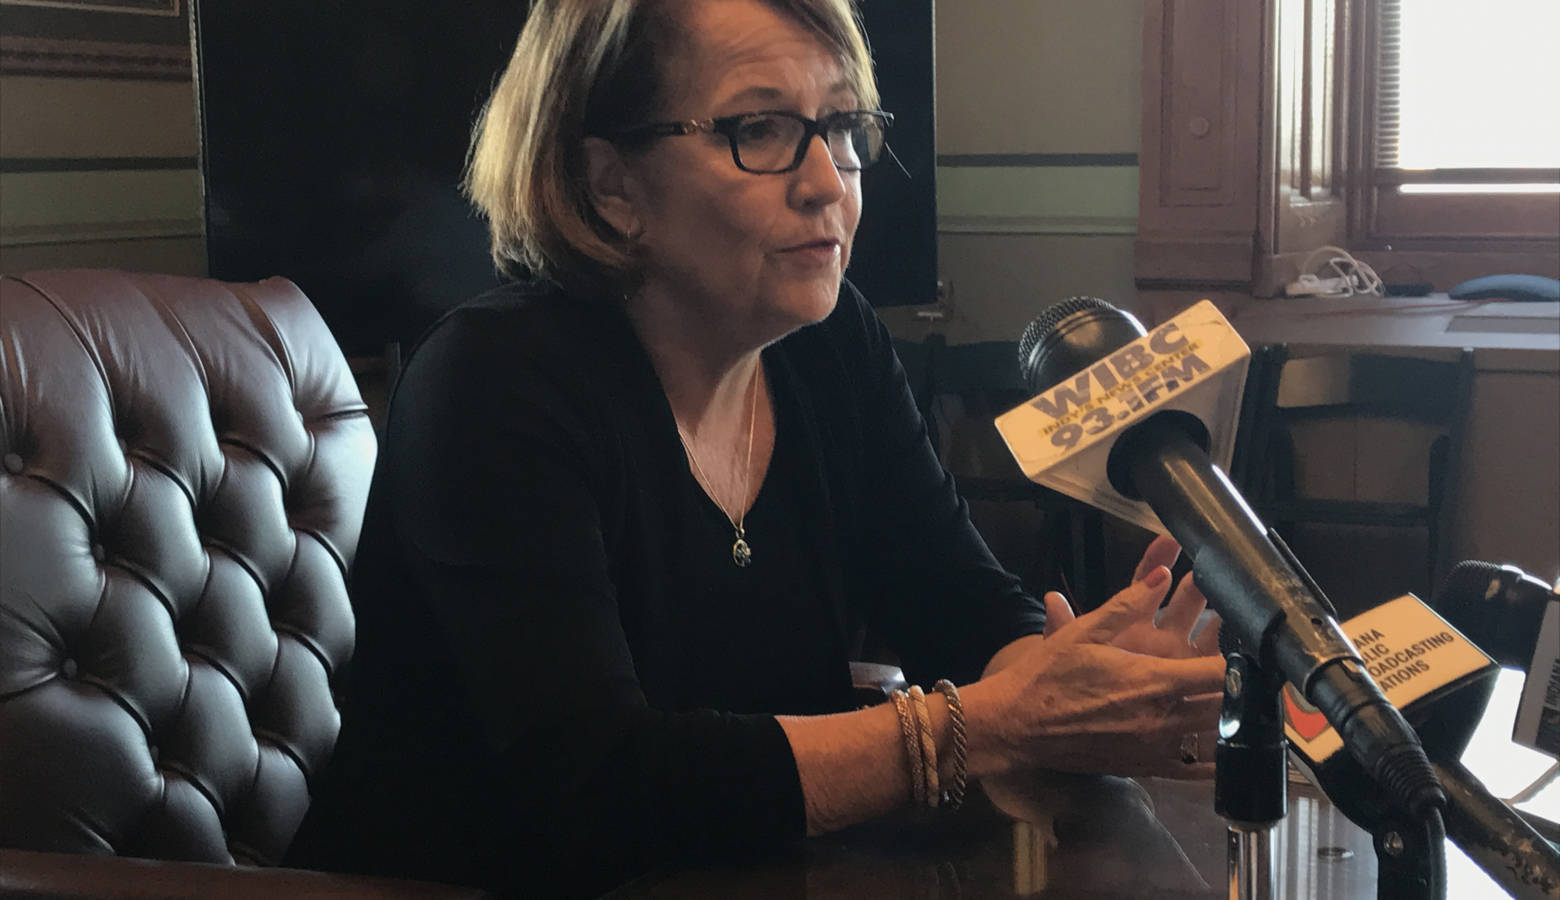 Indiana Chief Justice Loretta Rush co-chairs the group and says it was created in response to the growing number of court cases related to substance abuse. (Brandon Smith/IPB News)